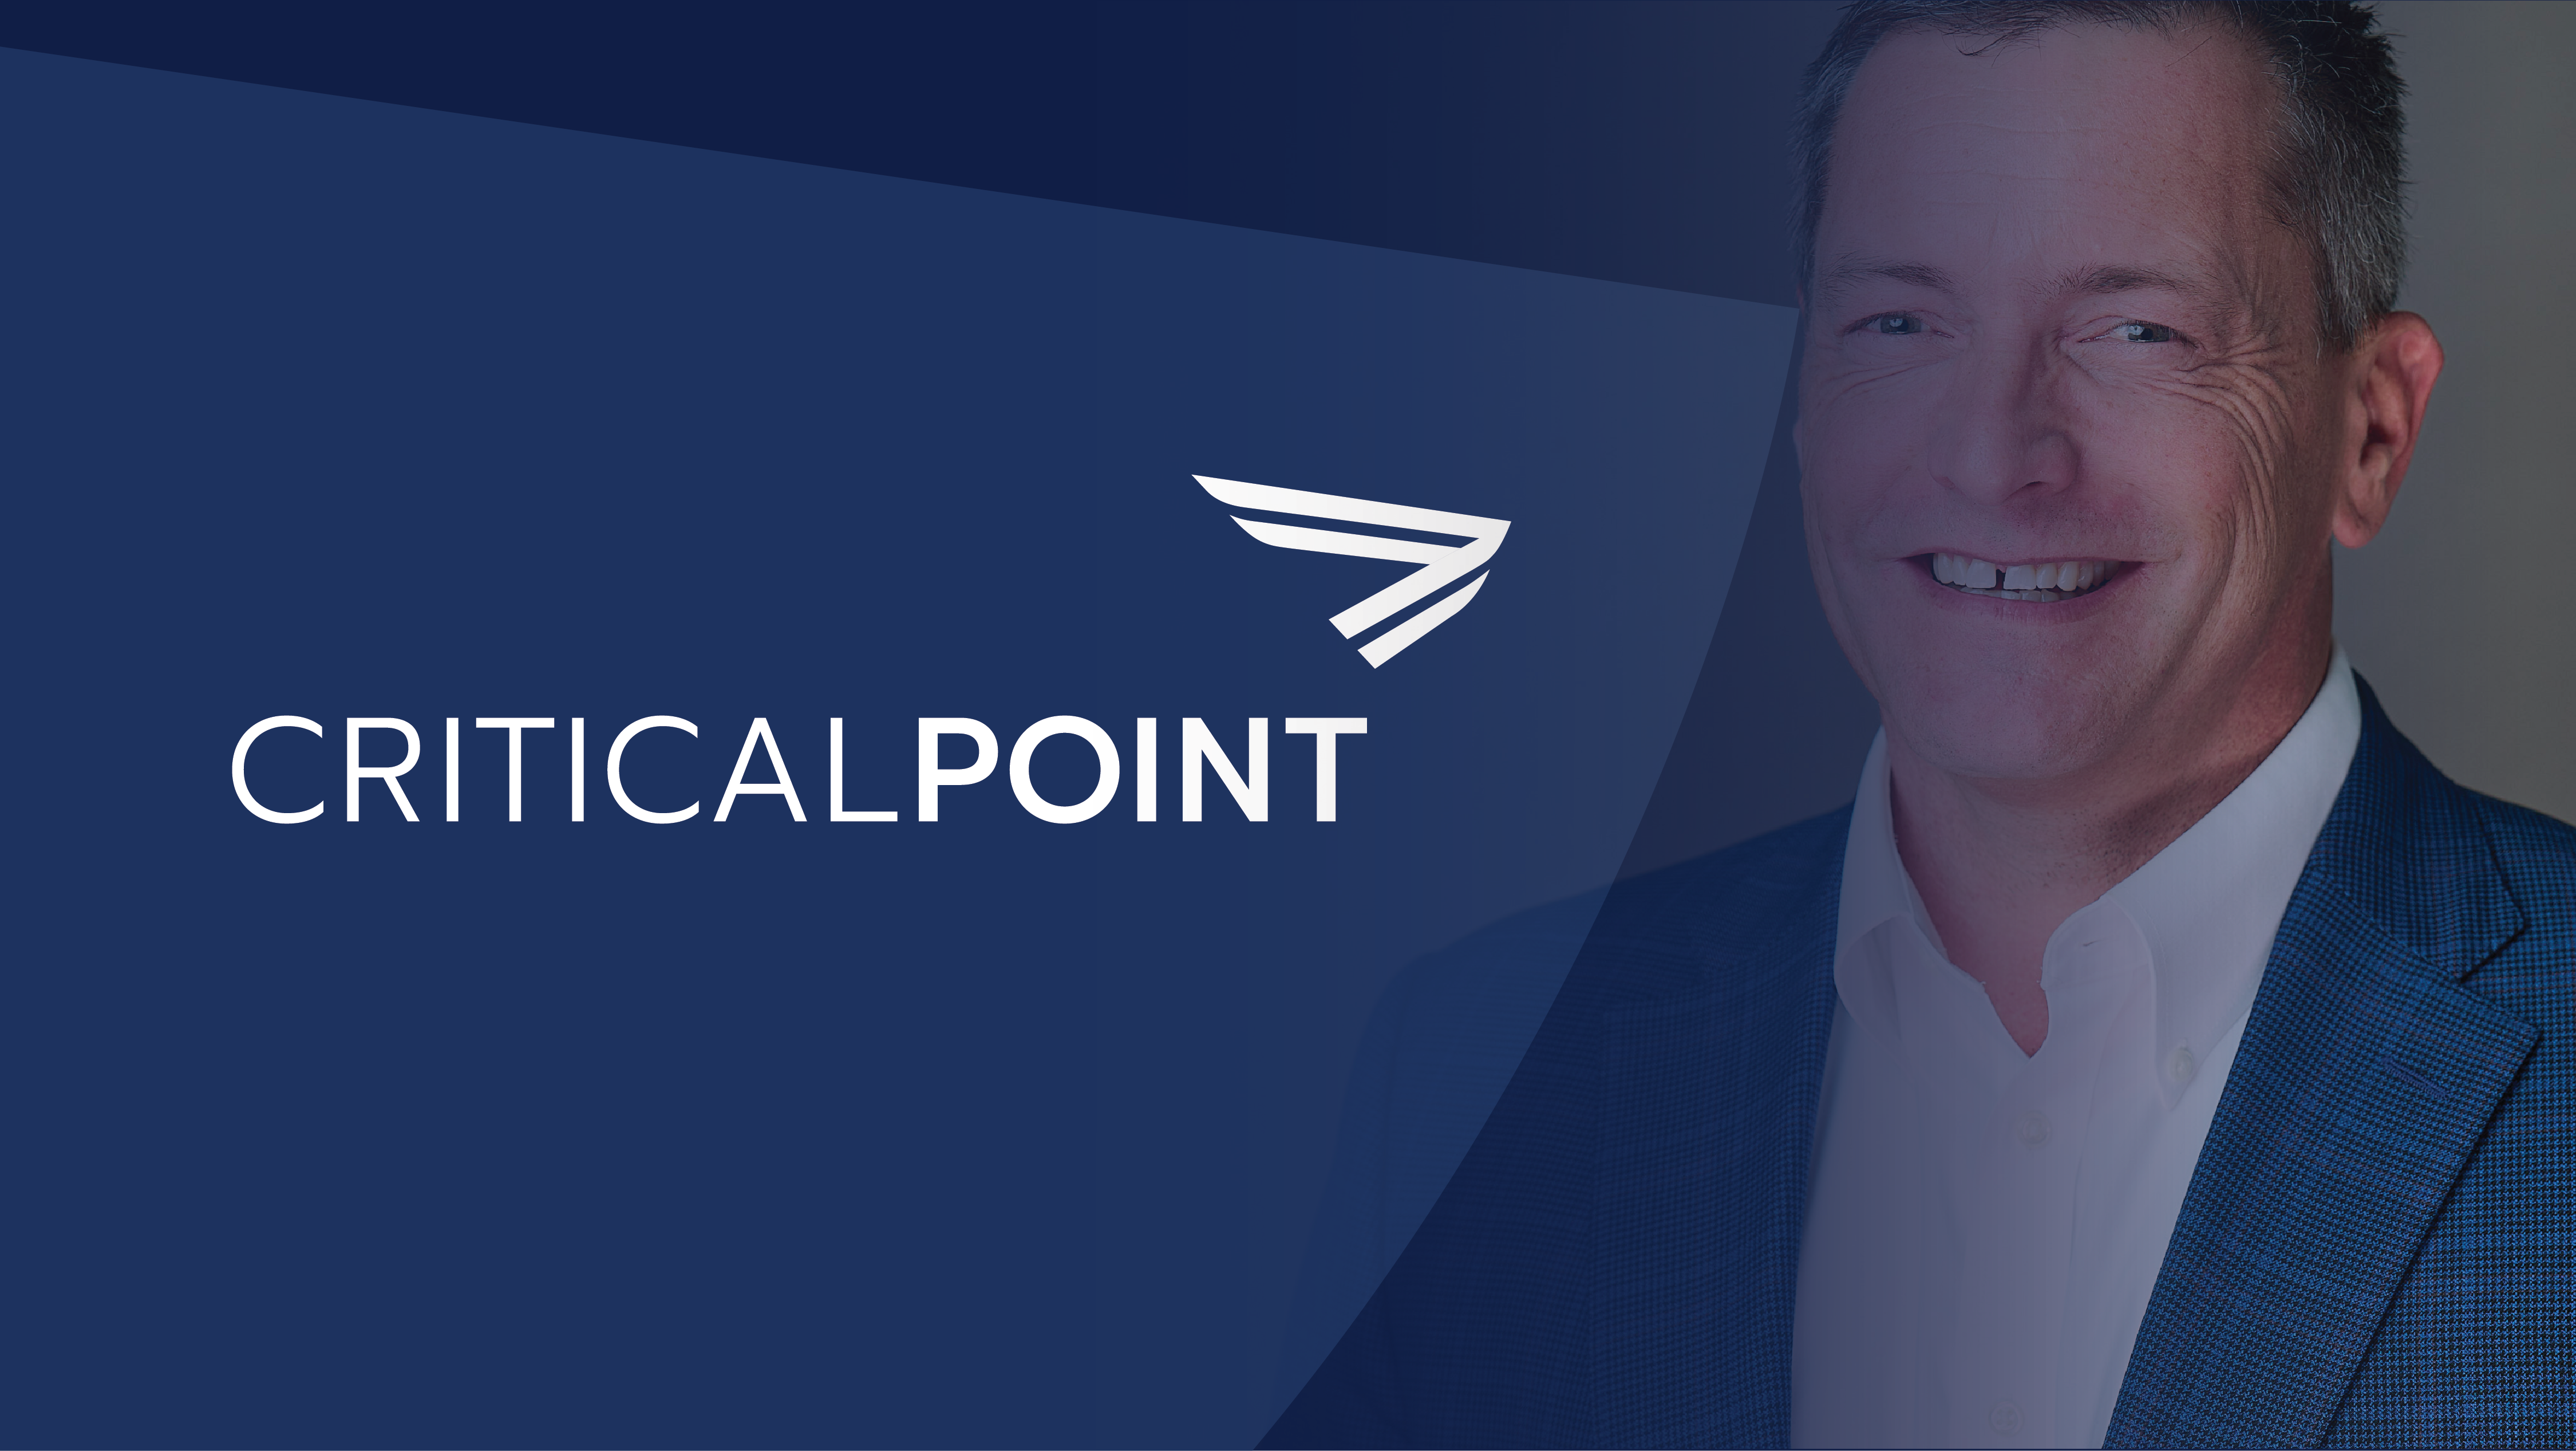 CriticalPoint Strengthens Its Key Partnerships with Managing Director, Business Development Hire Curt Himebauch